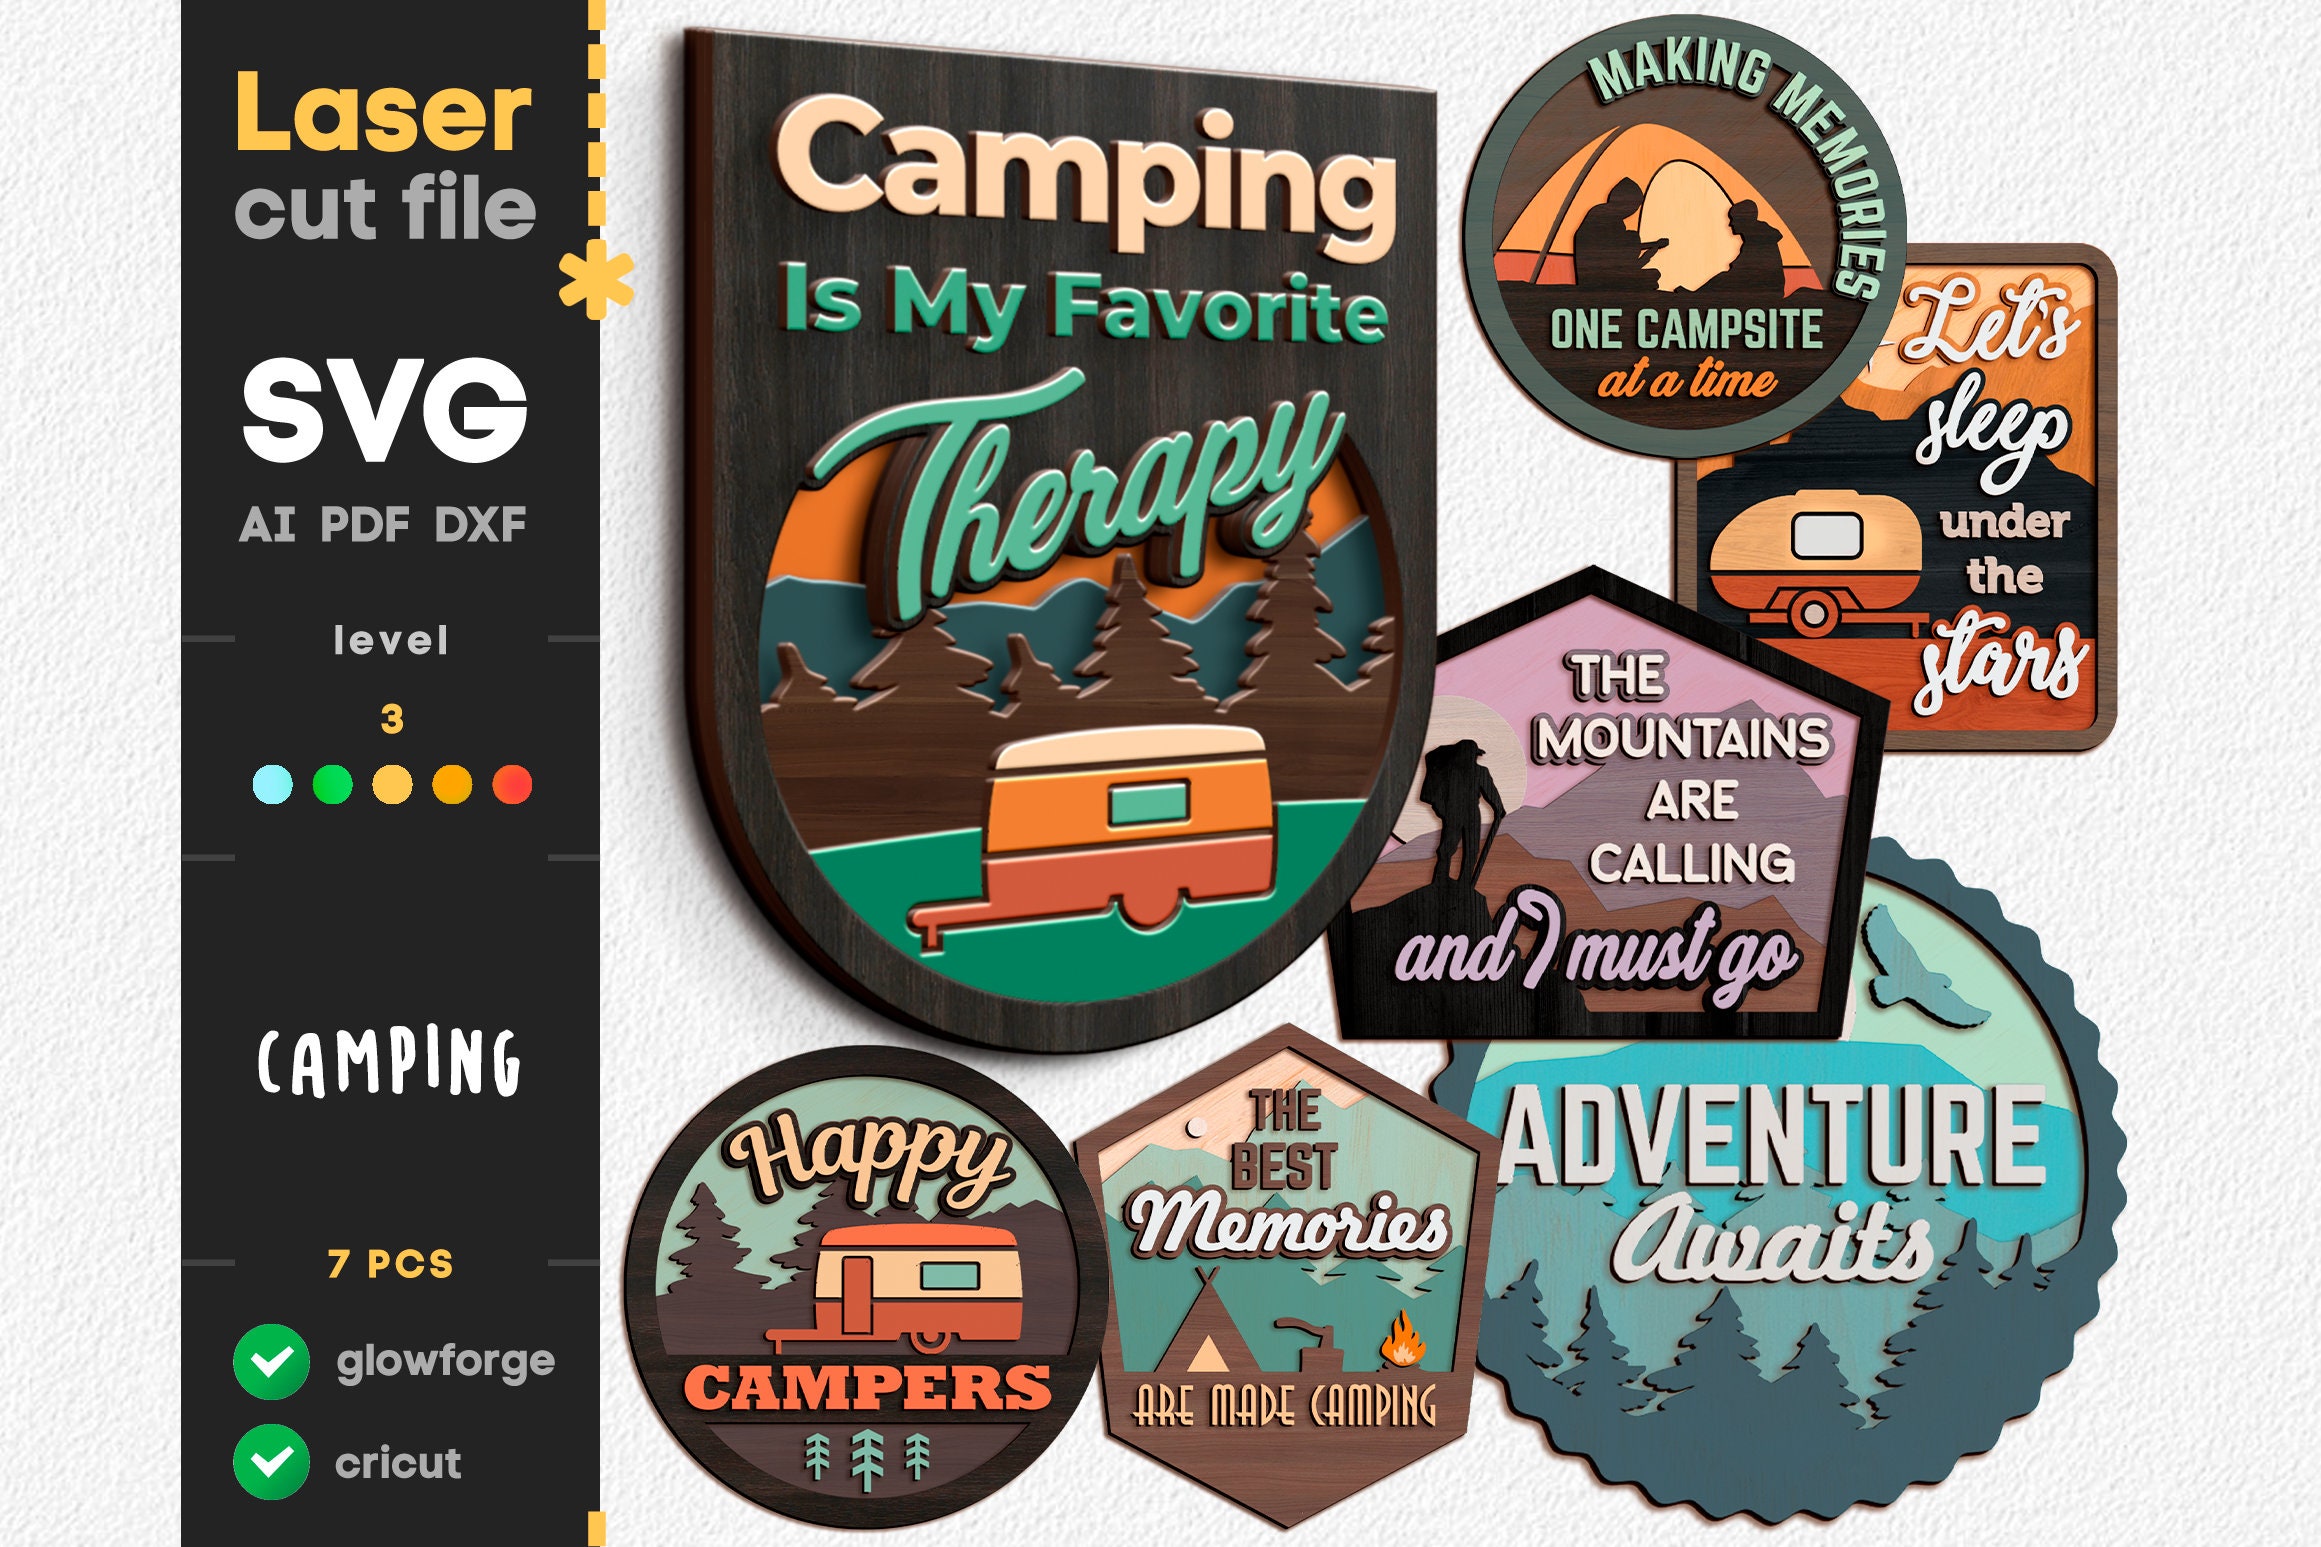 Сamping SVG Signs Bundle. Laser Cut File for Glowforge Cricut, Happy Camper  Mountains Tent Forest Nature Svg Dxf Ai Pdf Cdr INSTANT DOWNLOAD 